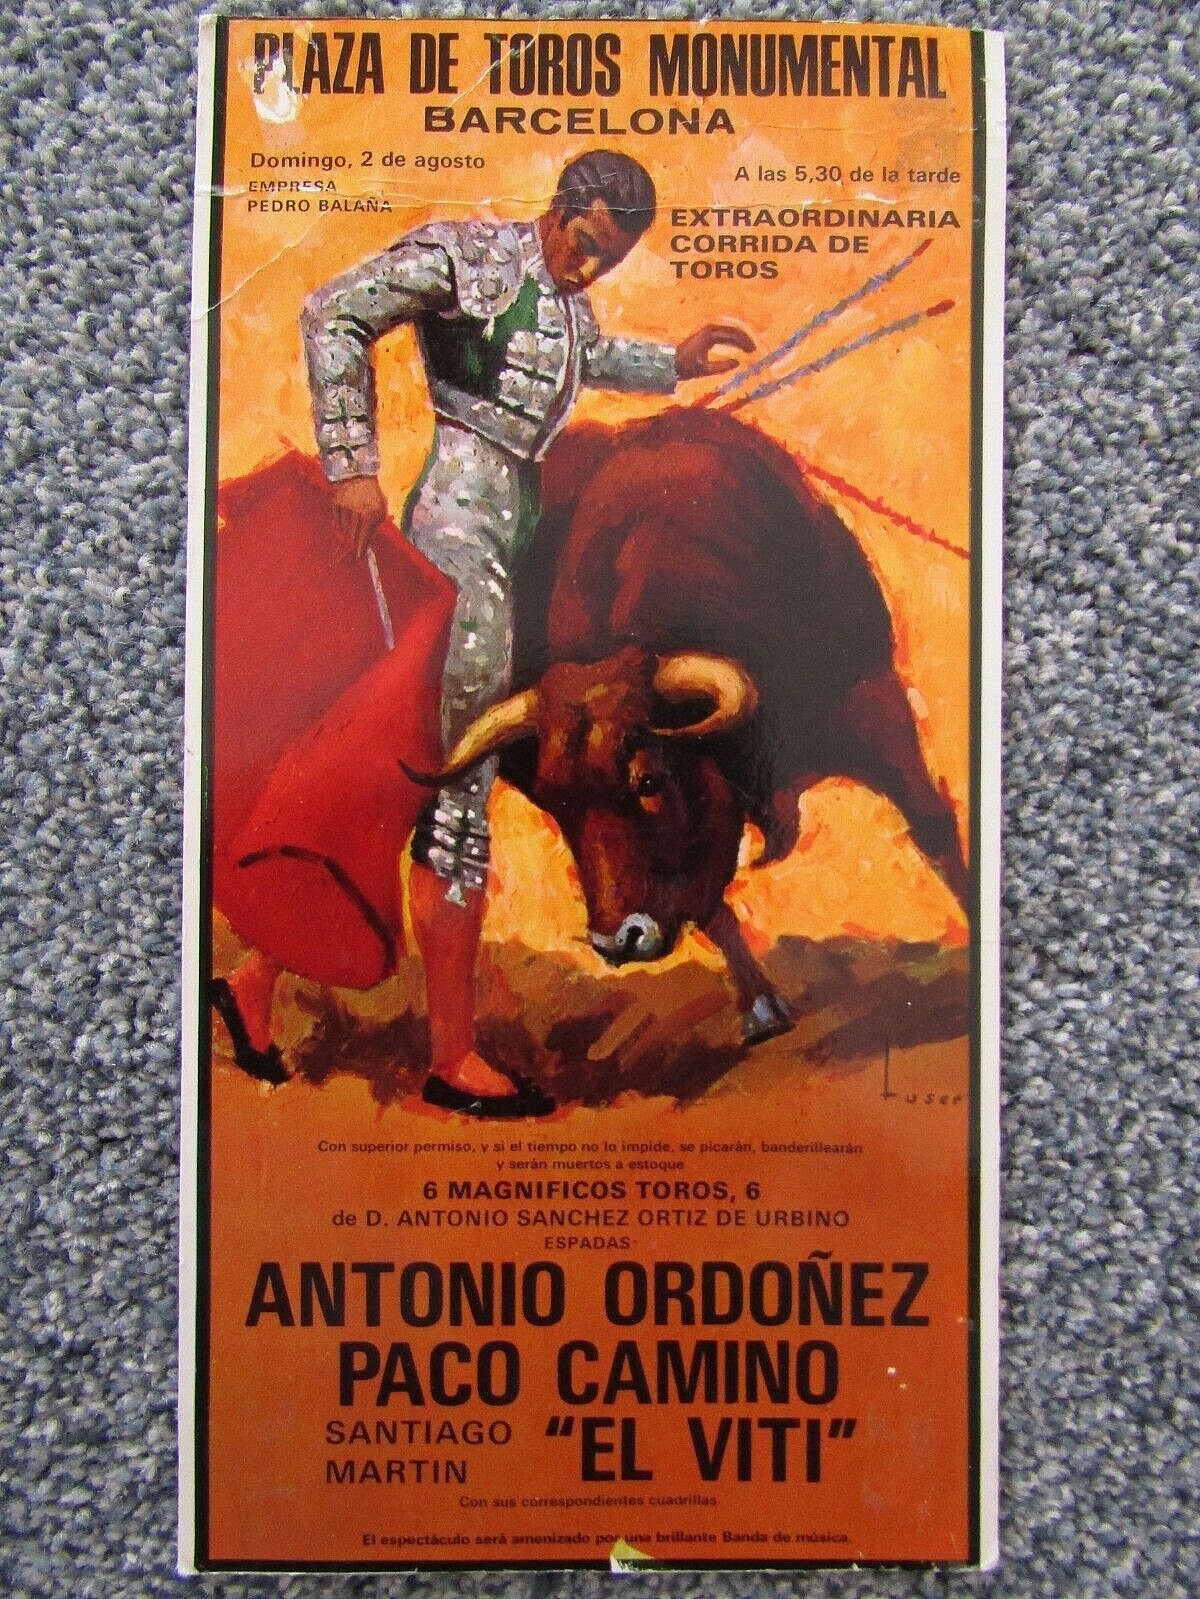 1971 Bull fighting postcard from Spain